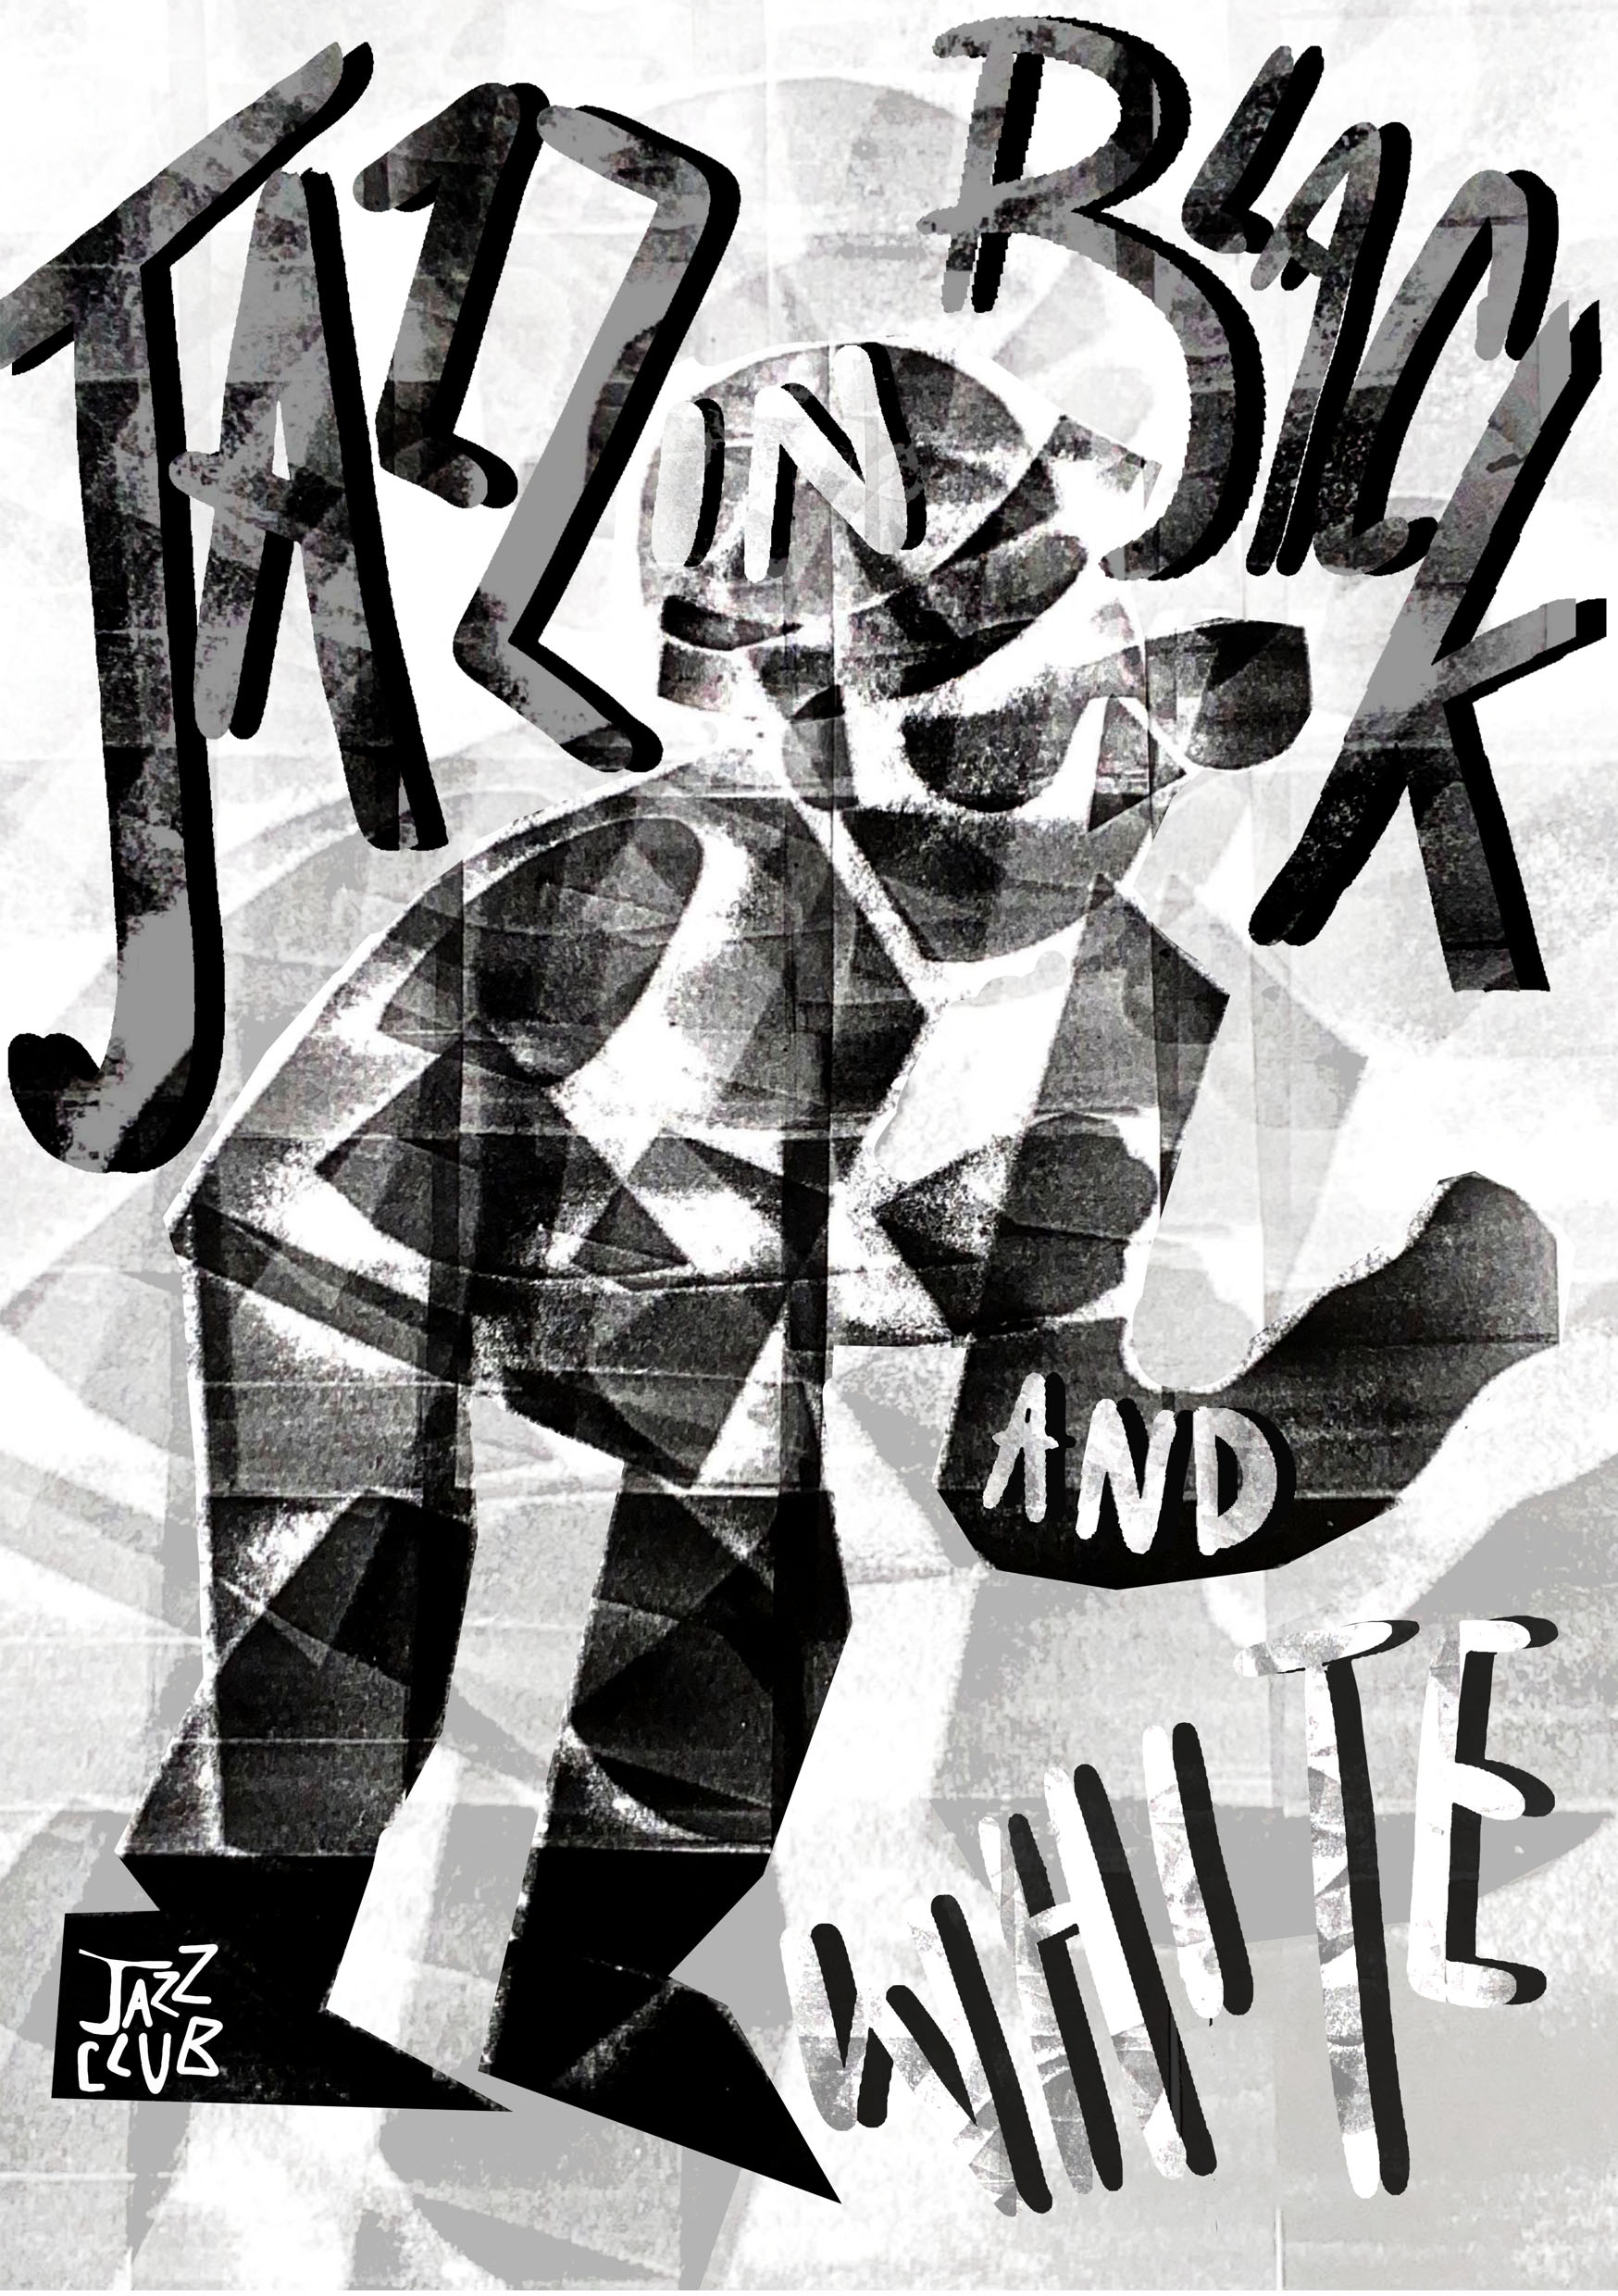 Illustration of a saxophonist jazz club member imagined as a poster.